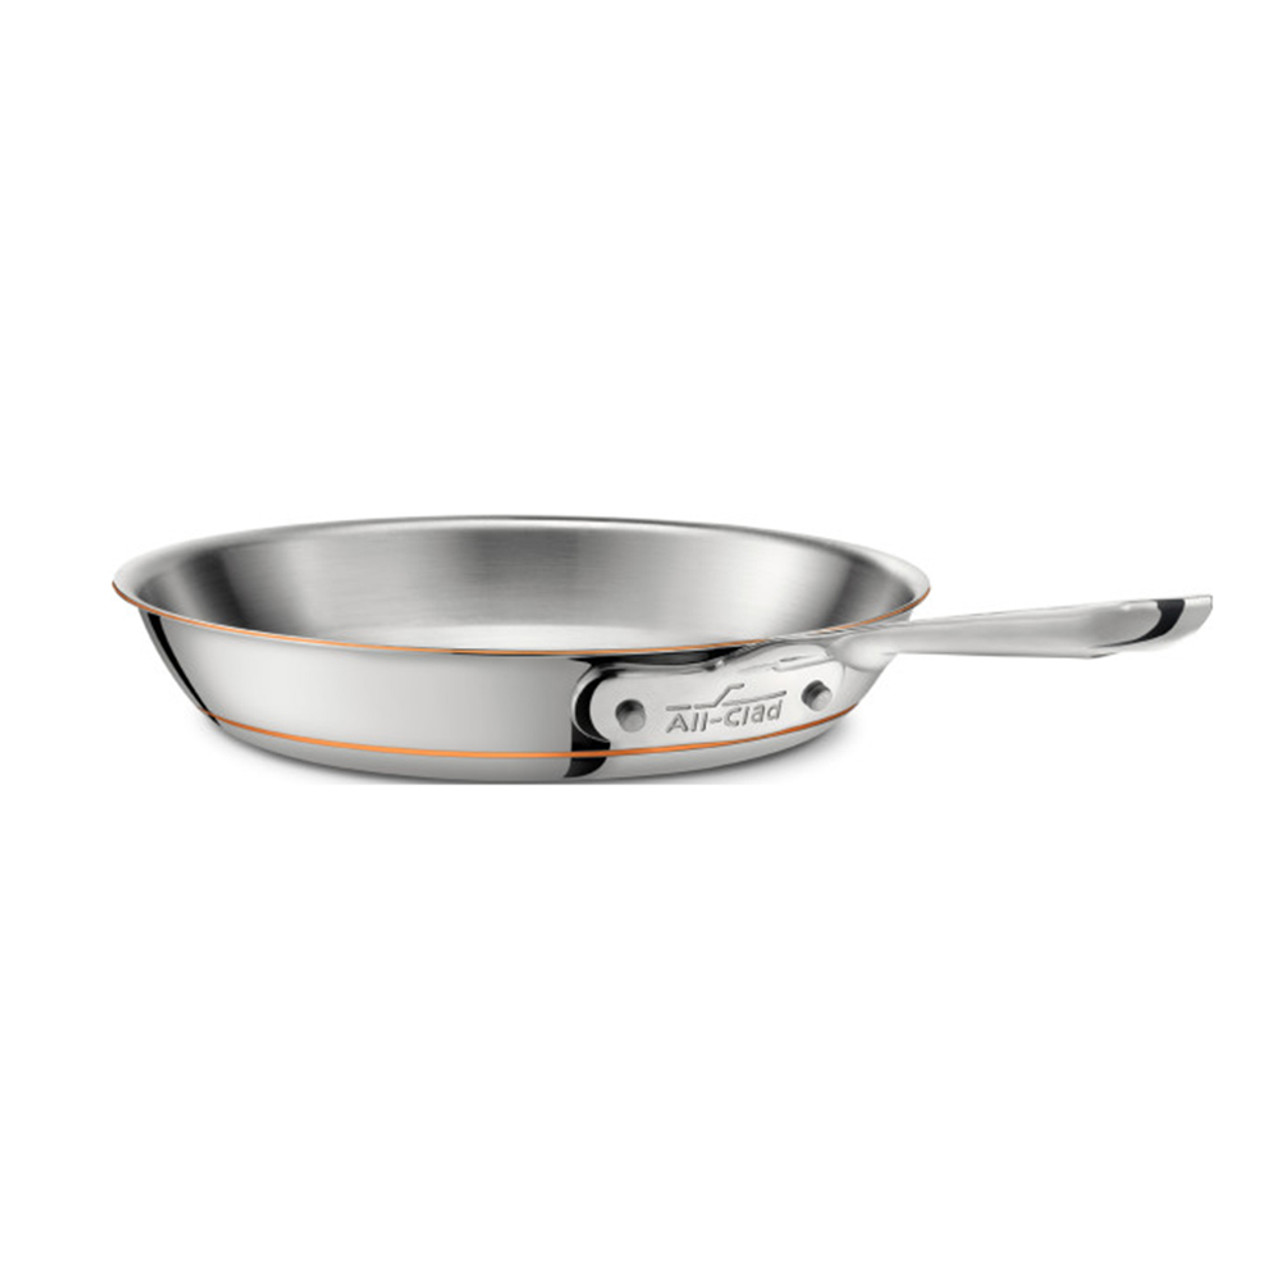 https://cdn11.bigcommerce.com/s-hccytny0od/images/stencil/1280x1280/products/505/1899/all-clad-copper-core-fry-pan-10-inch__40177.1510974663.jpg?c=2?imbypass=on